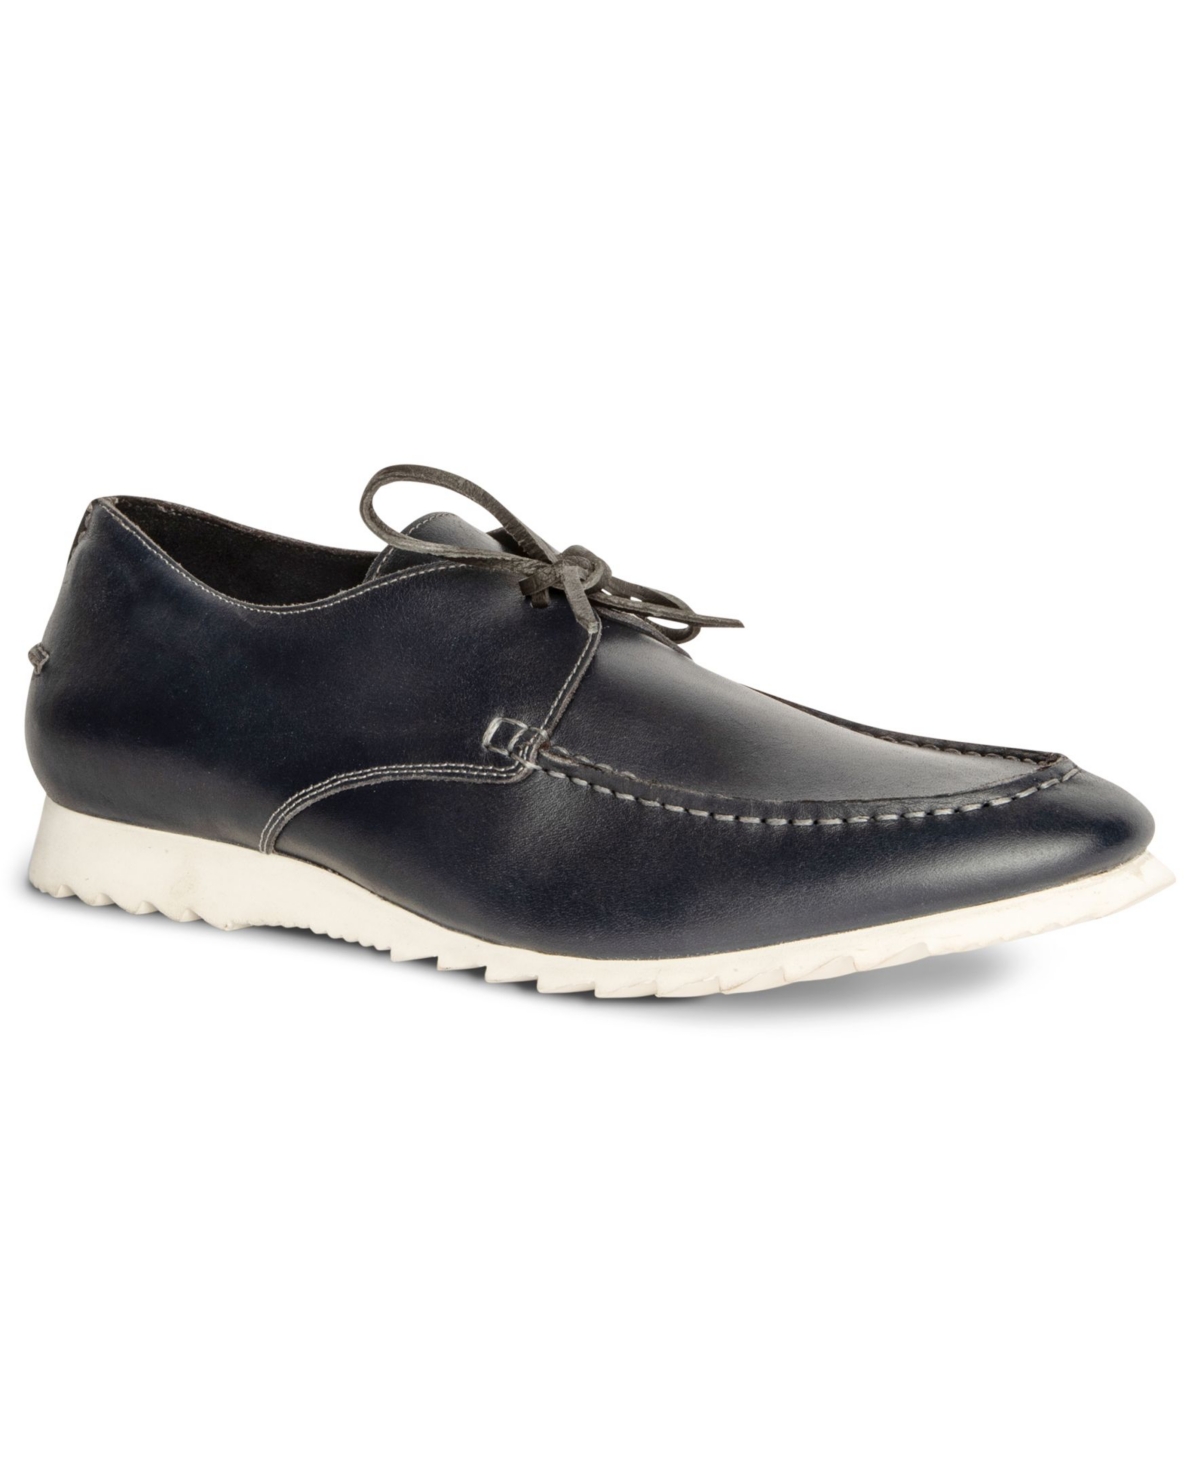 Hendrix Moccasins Men's Lace-Up Casual Shoe - Navy Blue